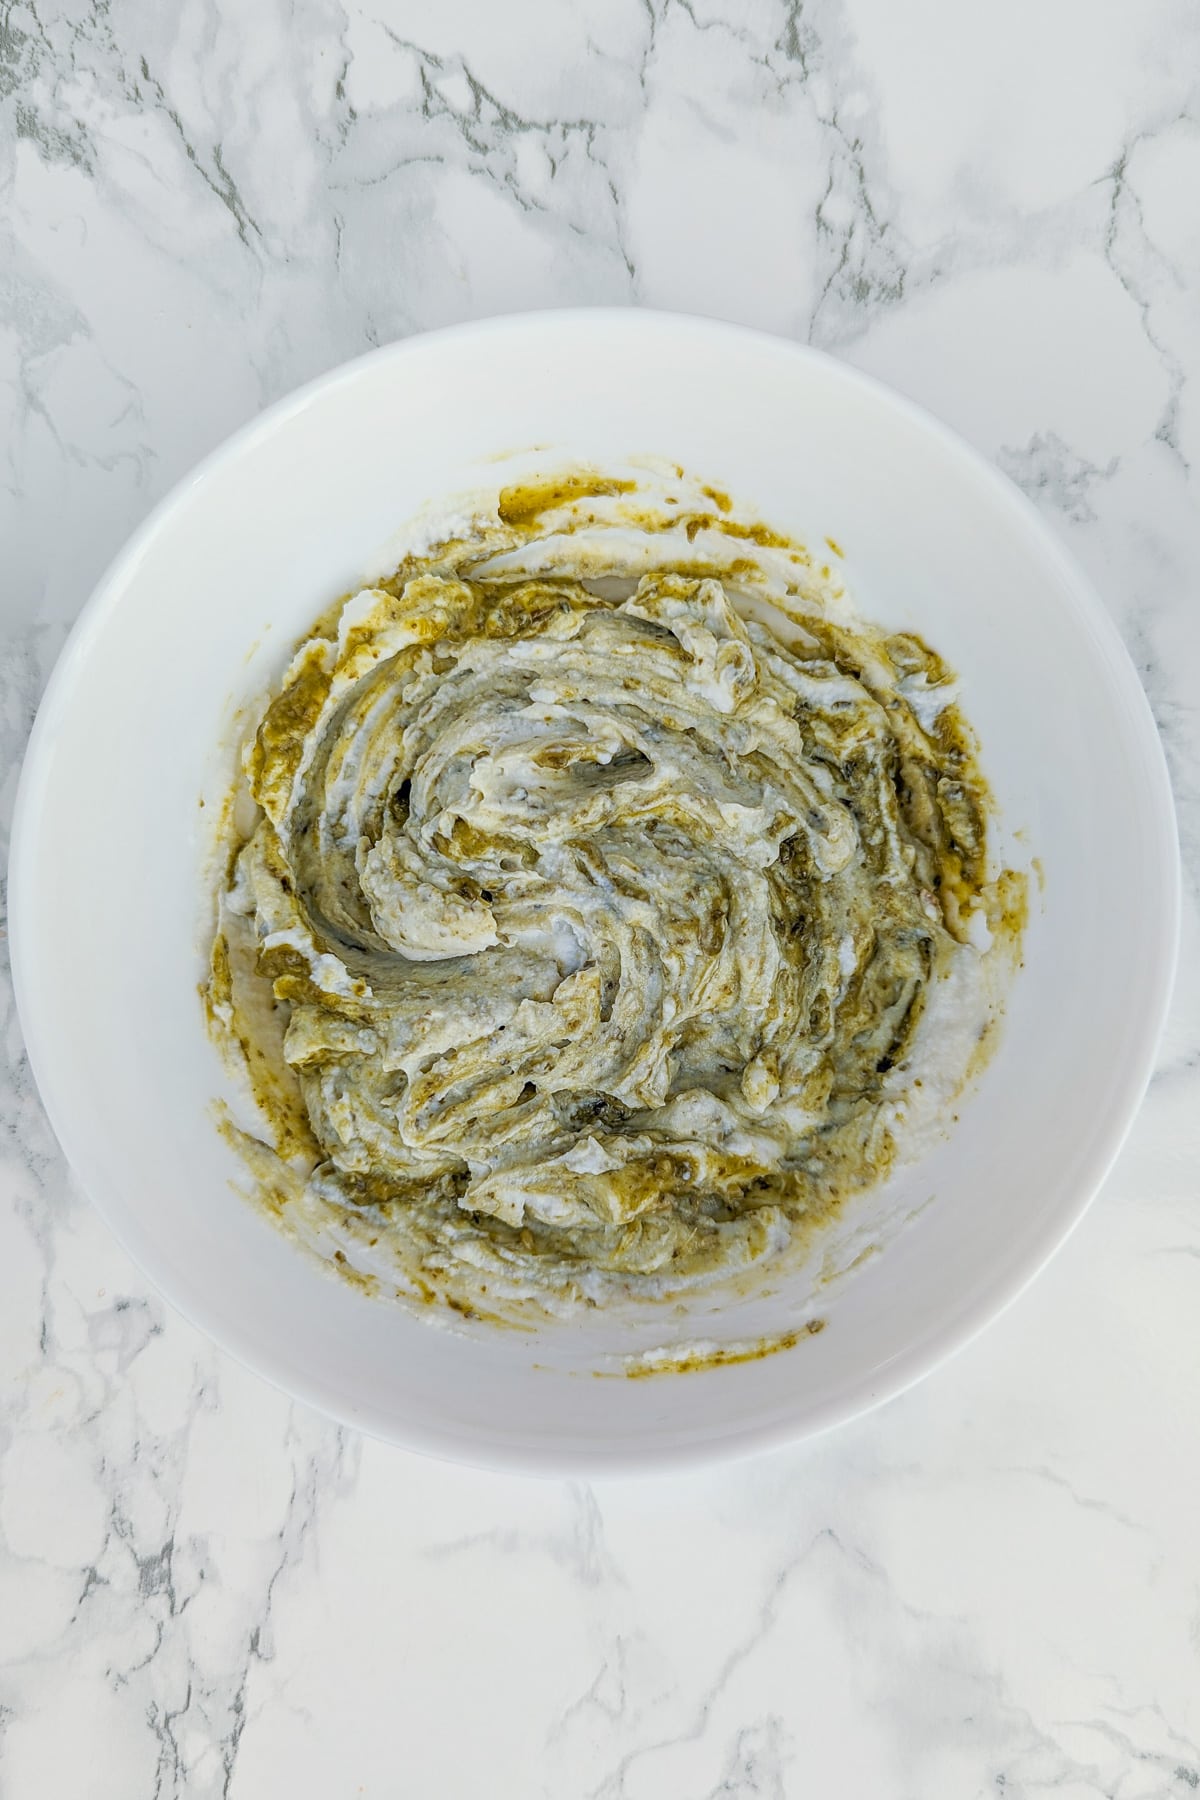 Top view of a white plate with a mix of ricotta and basil pesto on a white marble table.